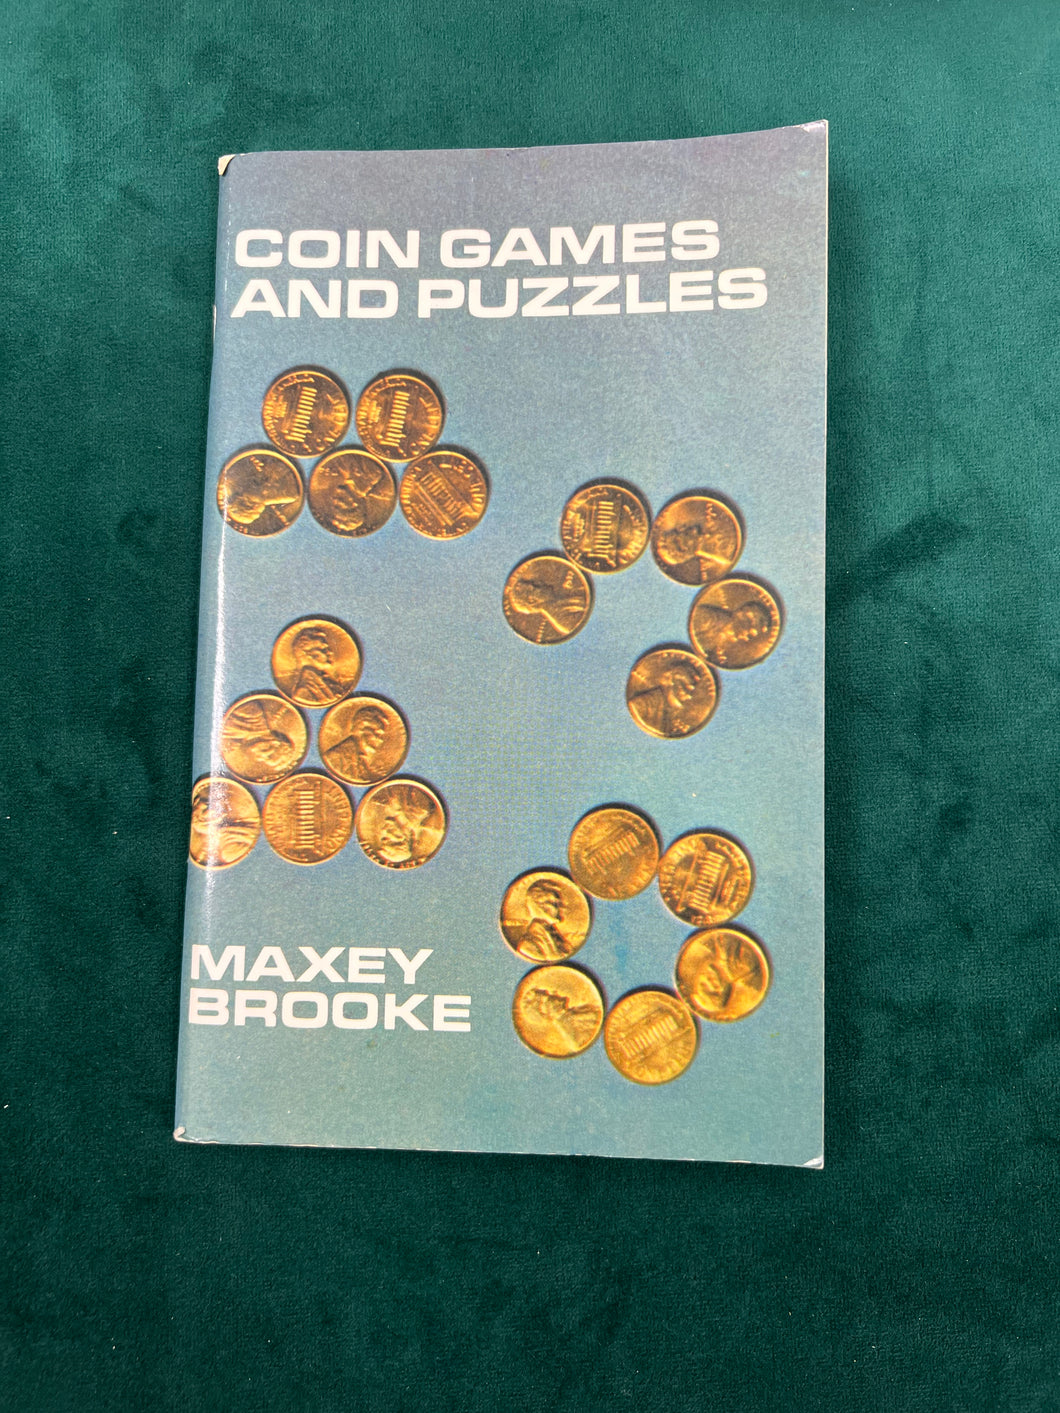 Coin Games and Puzzles by Maxey Brooke